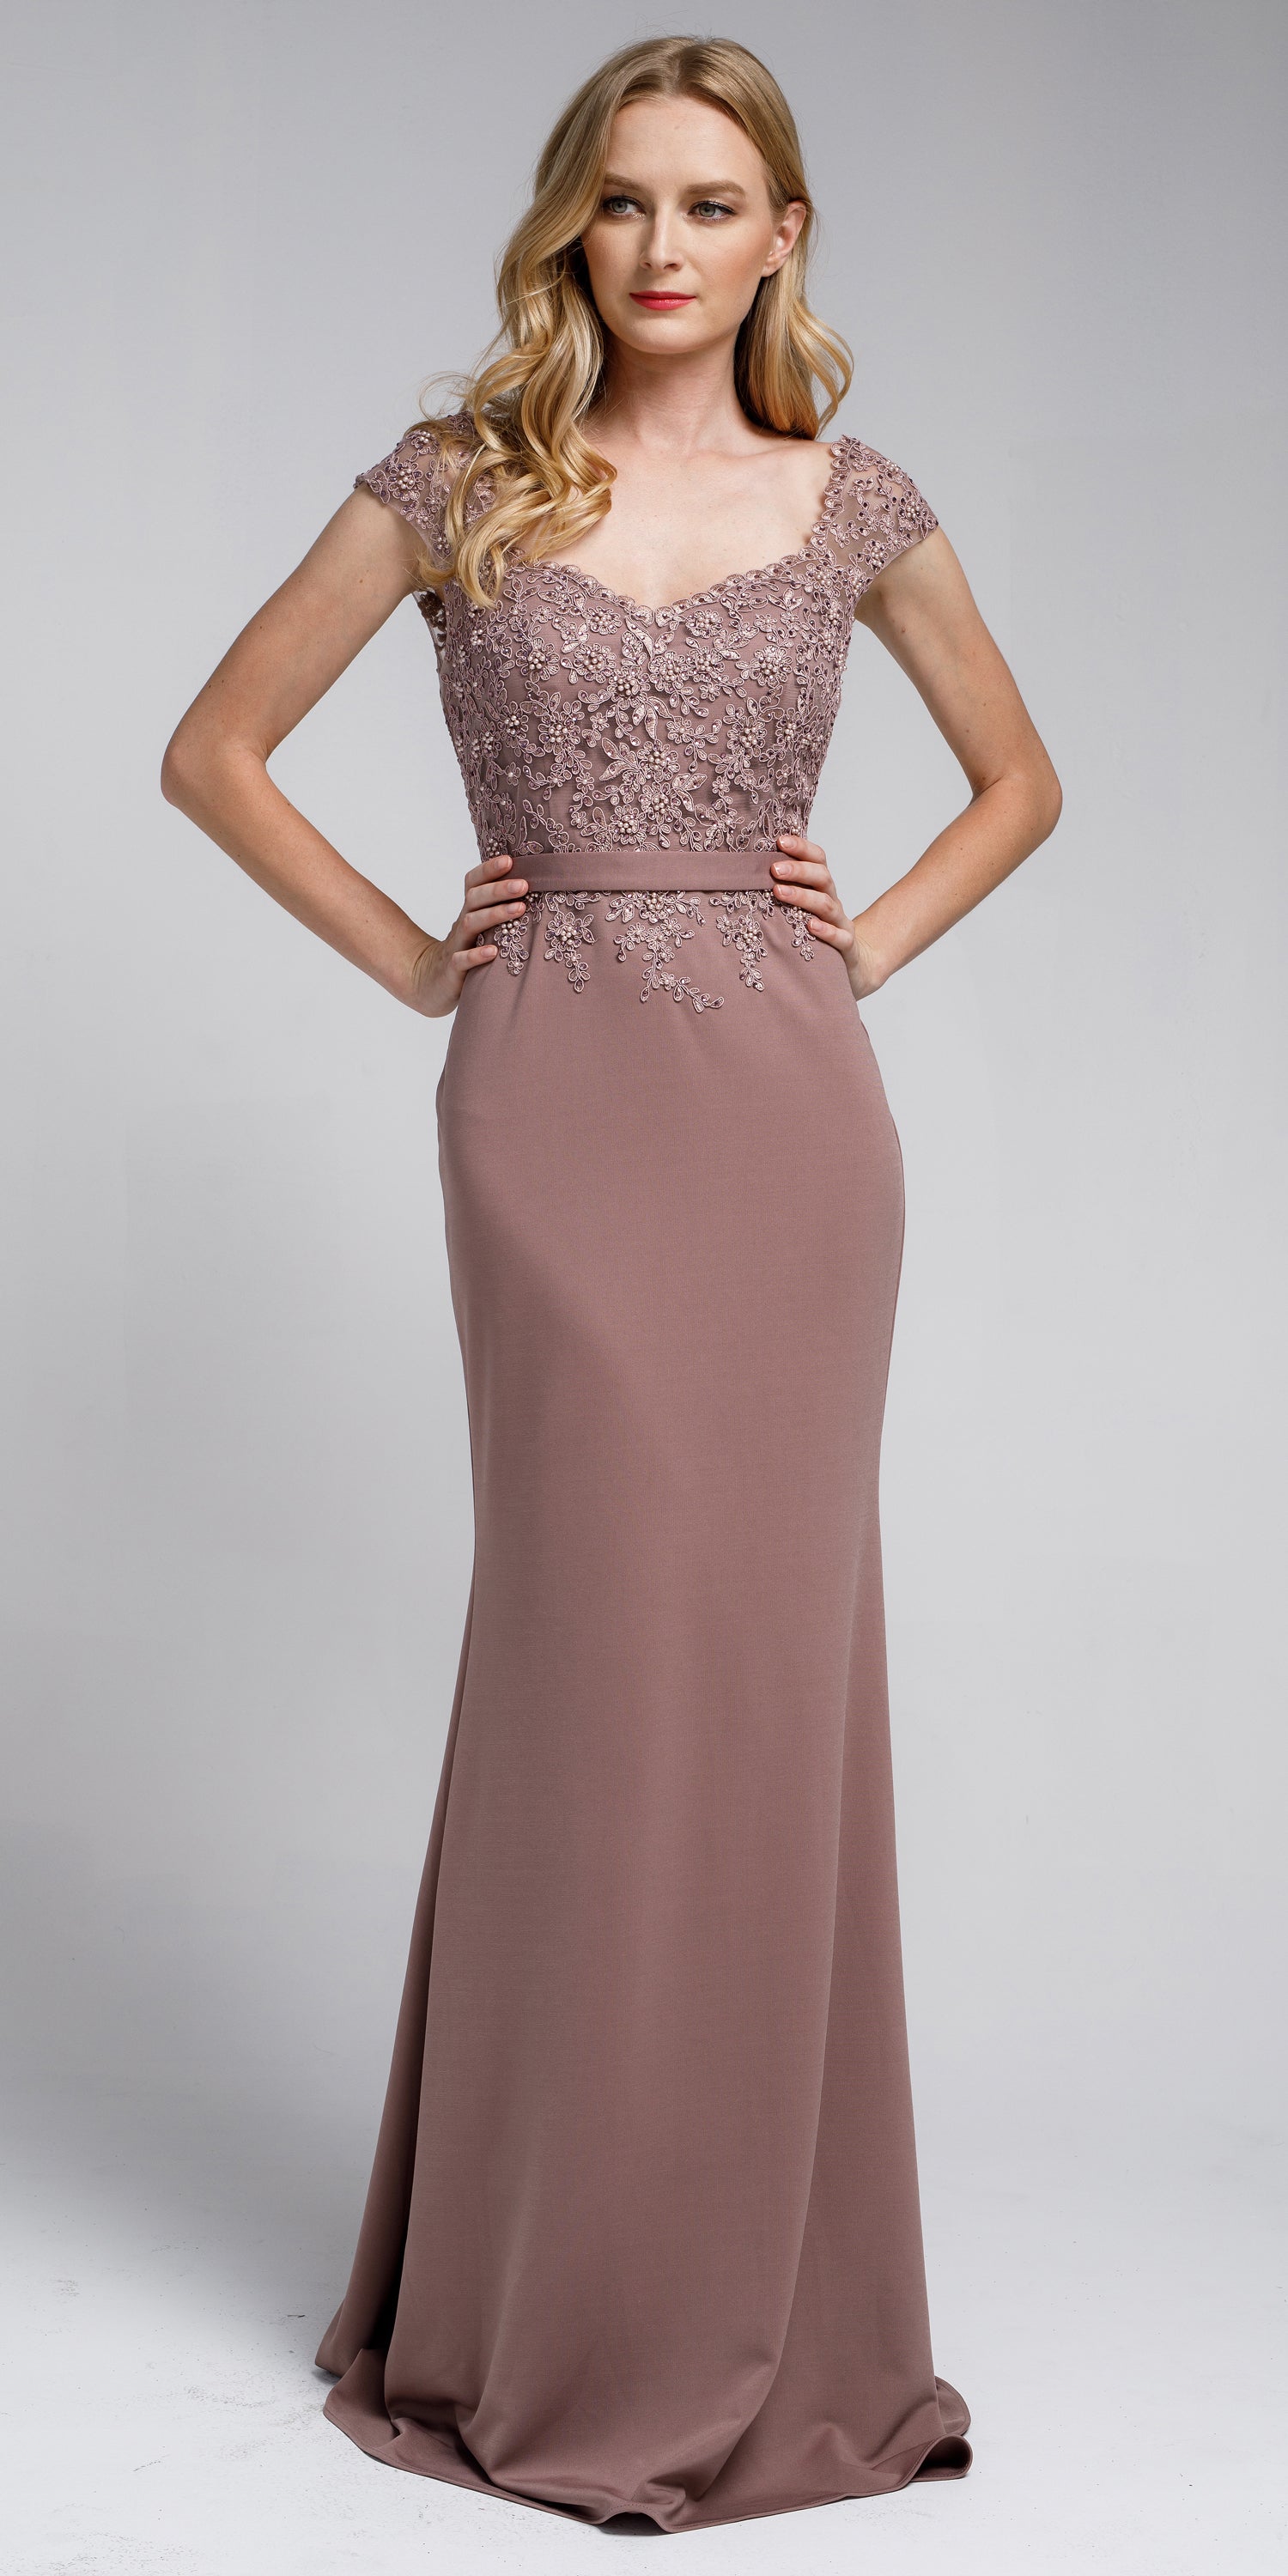 Image of Sweatheart Neckline Embroidered Evening Gown in Dusty Rose